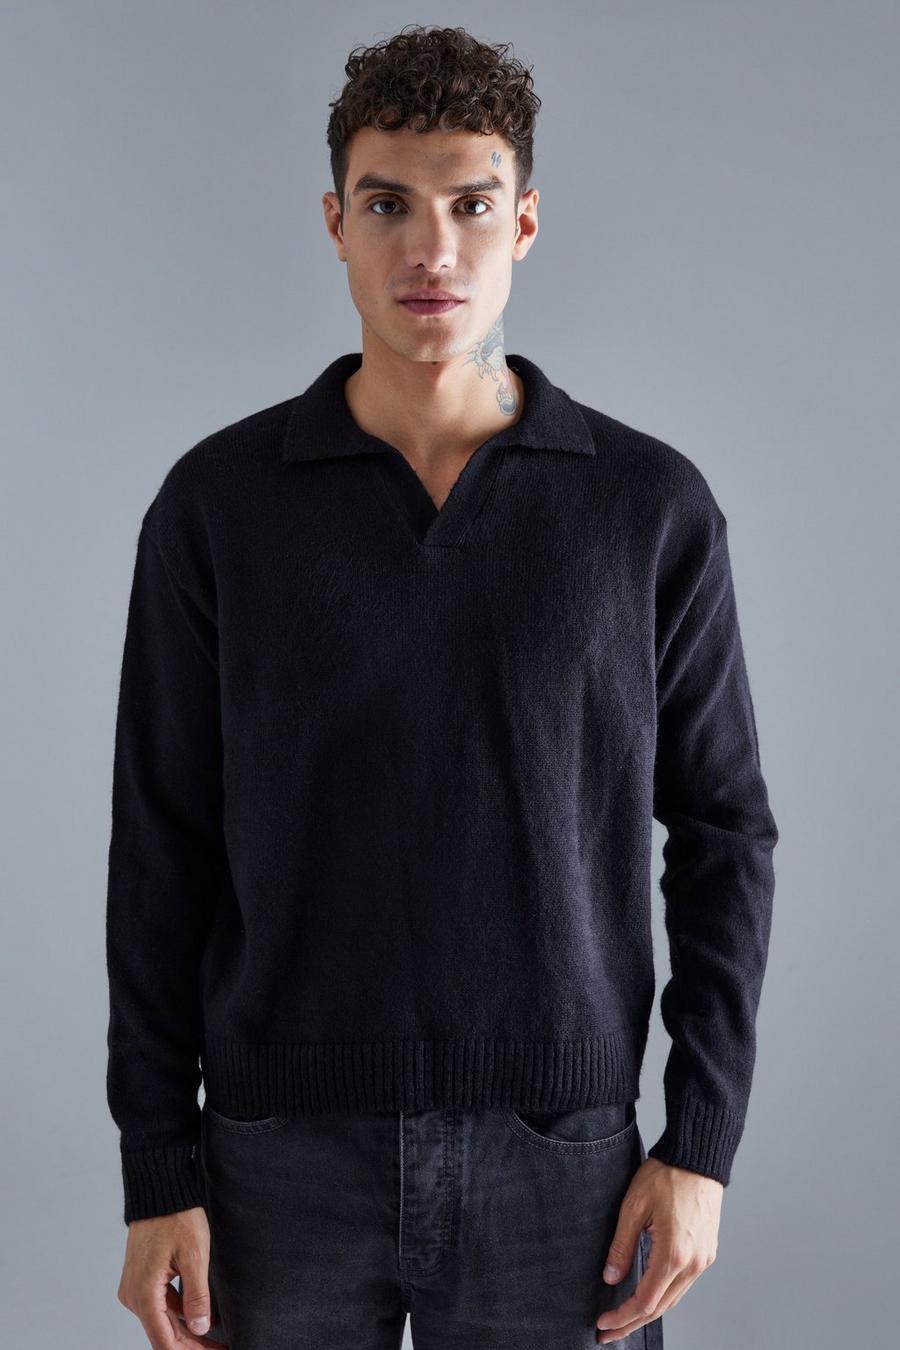 Black Boxy Long Sleeve Knitted Revere Polo